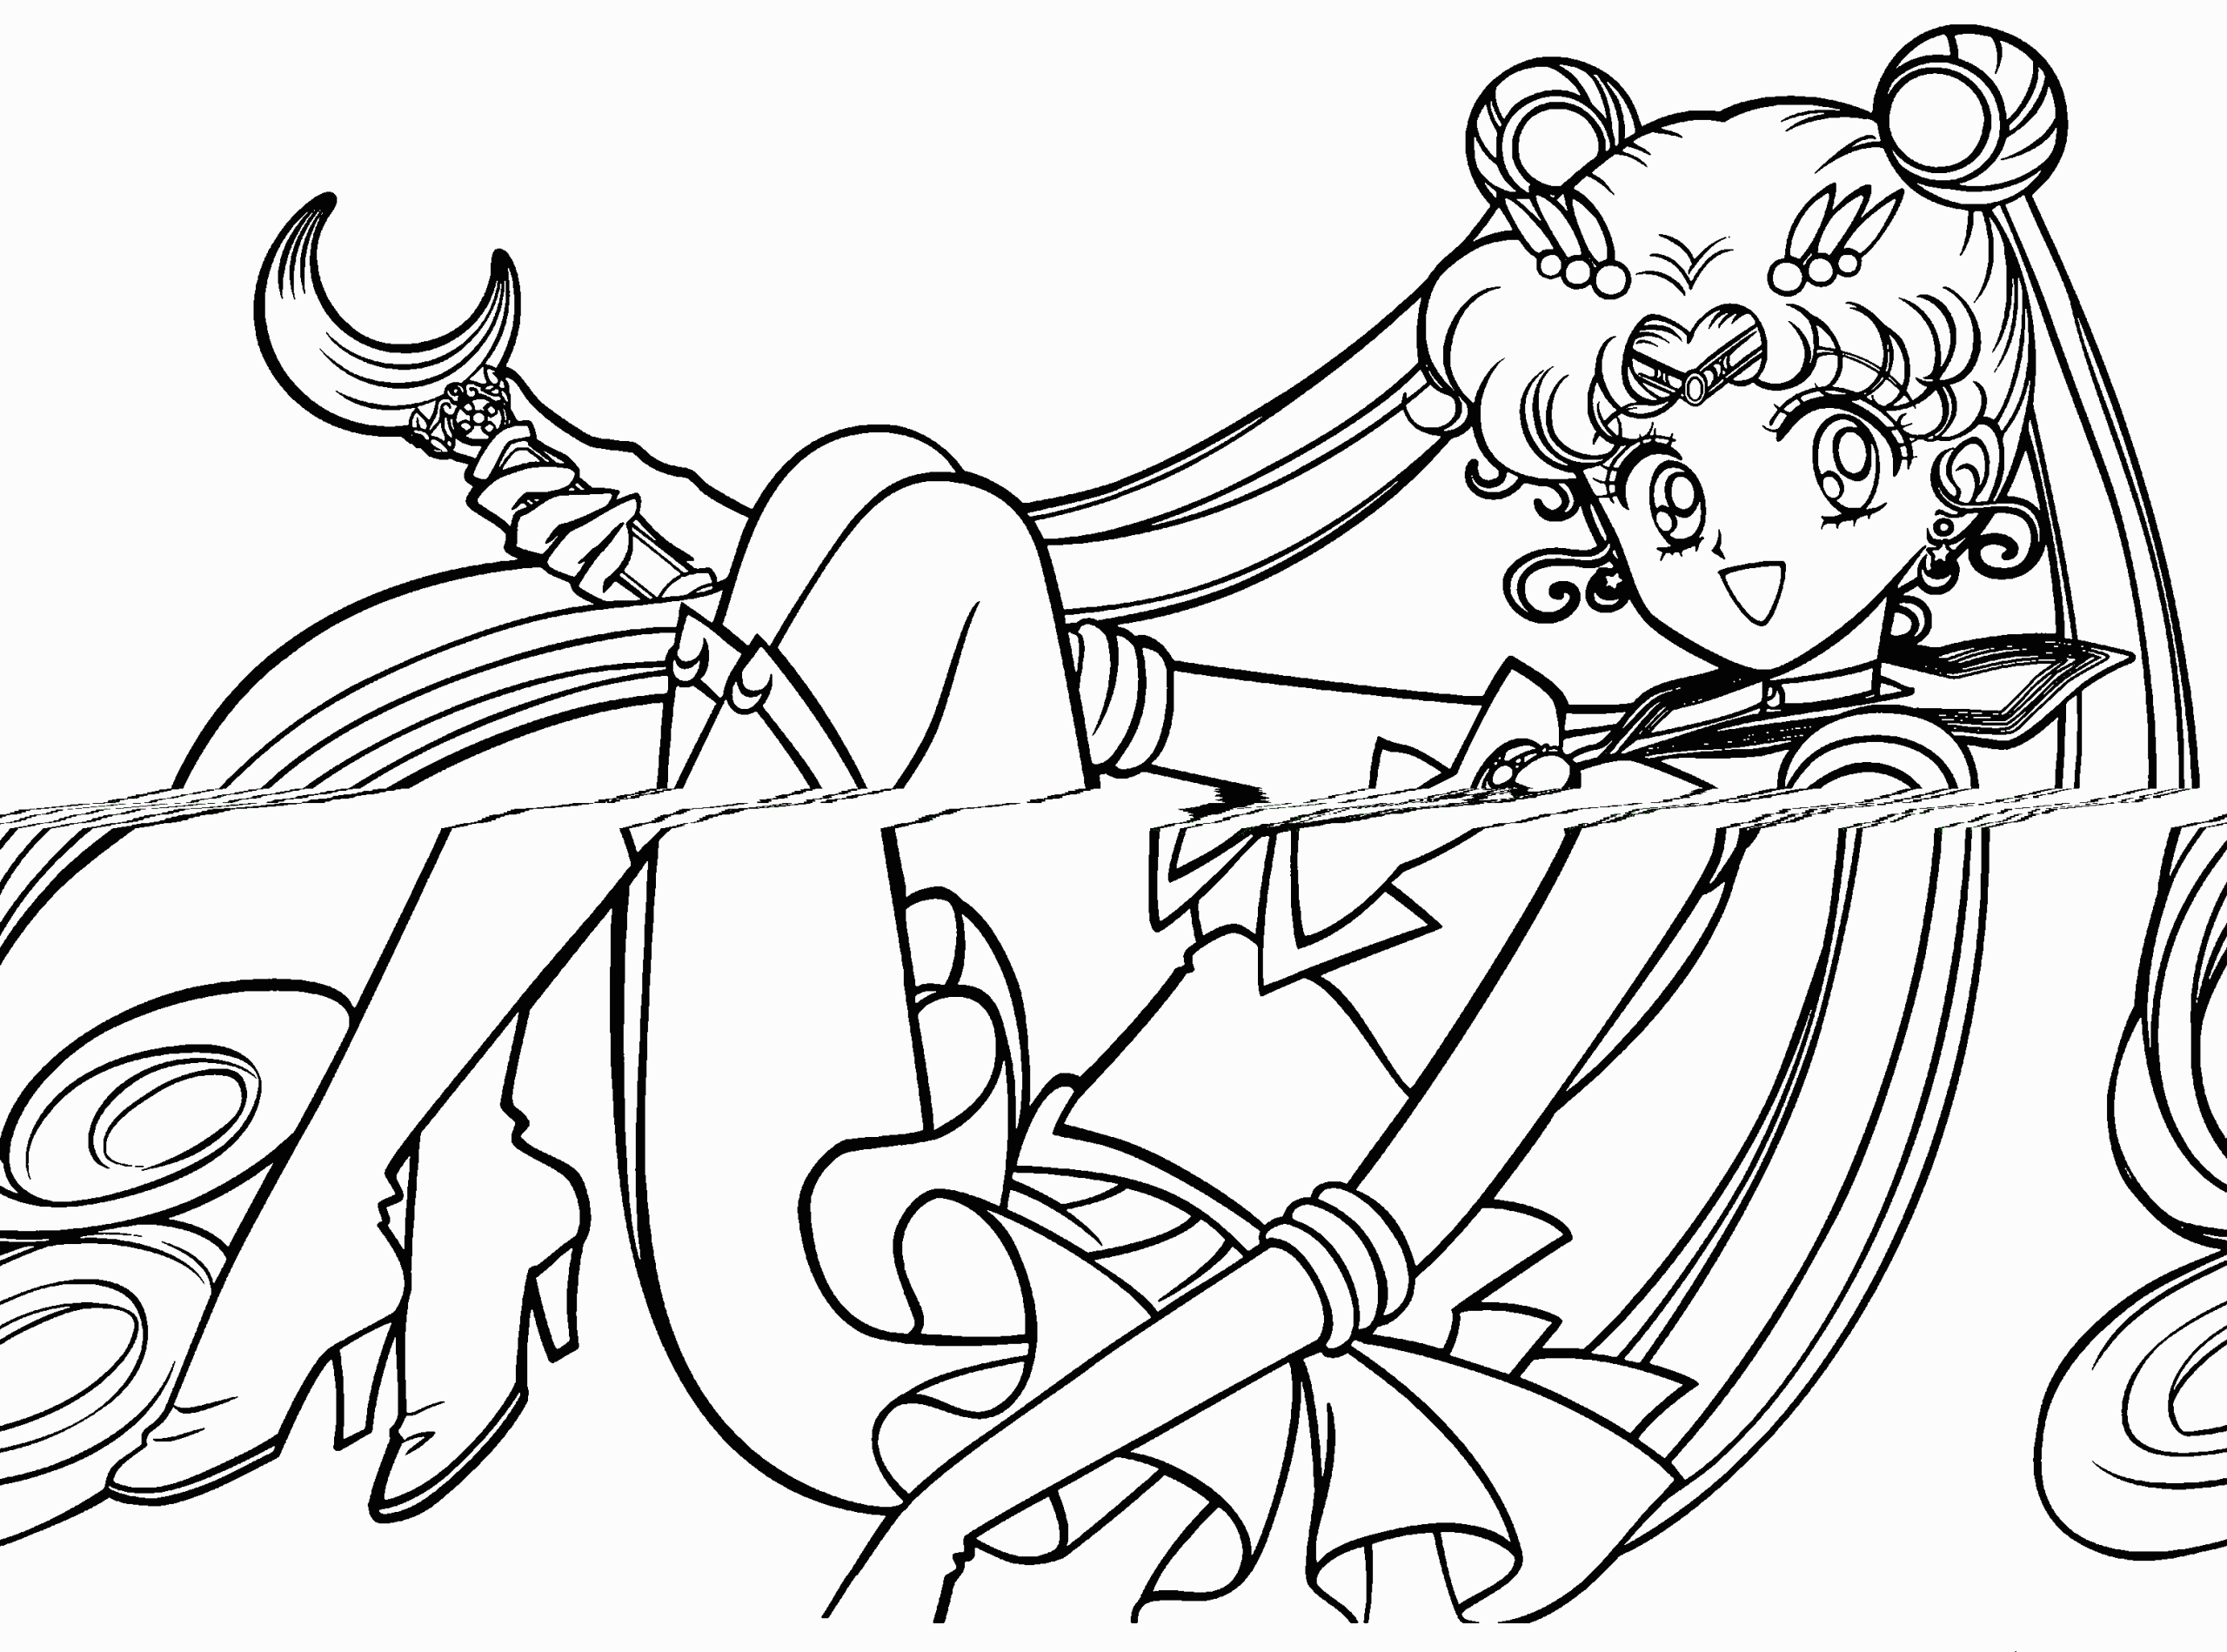 Coloring Pages For Kids Online
 Free Printable Sailor Moon Coloring Pages For Kids